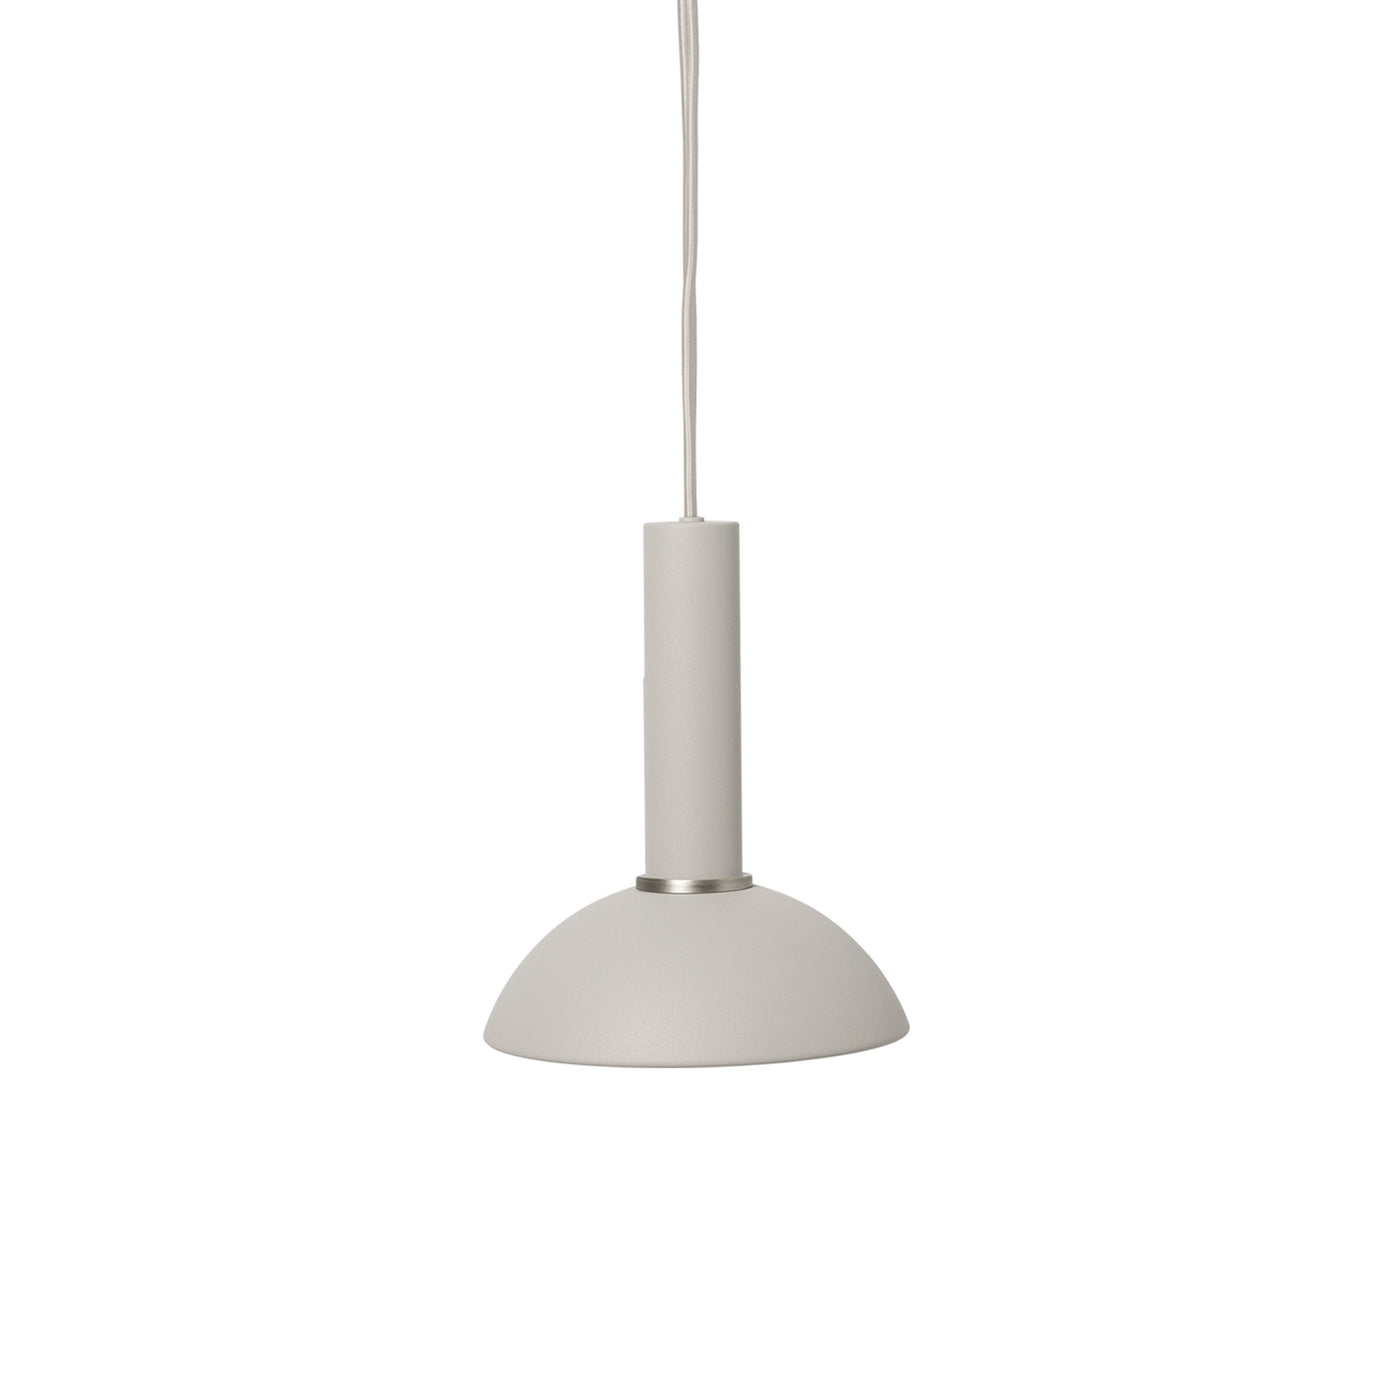 ferm LIVING Collect Lighting hoop Shade. Shop online at someday designs. #colour_light-grey